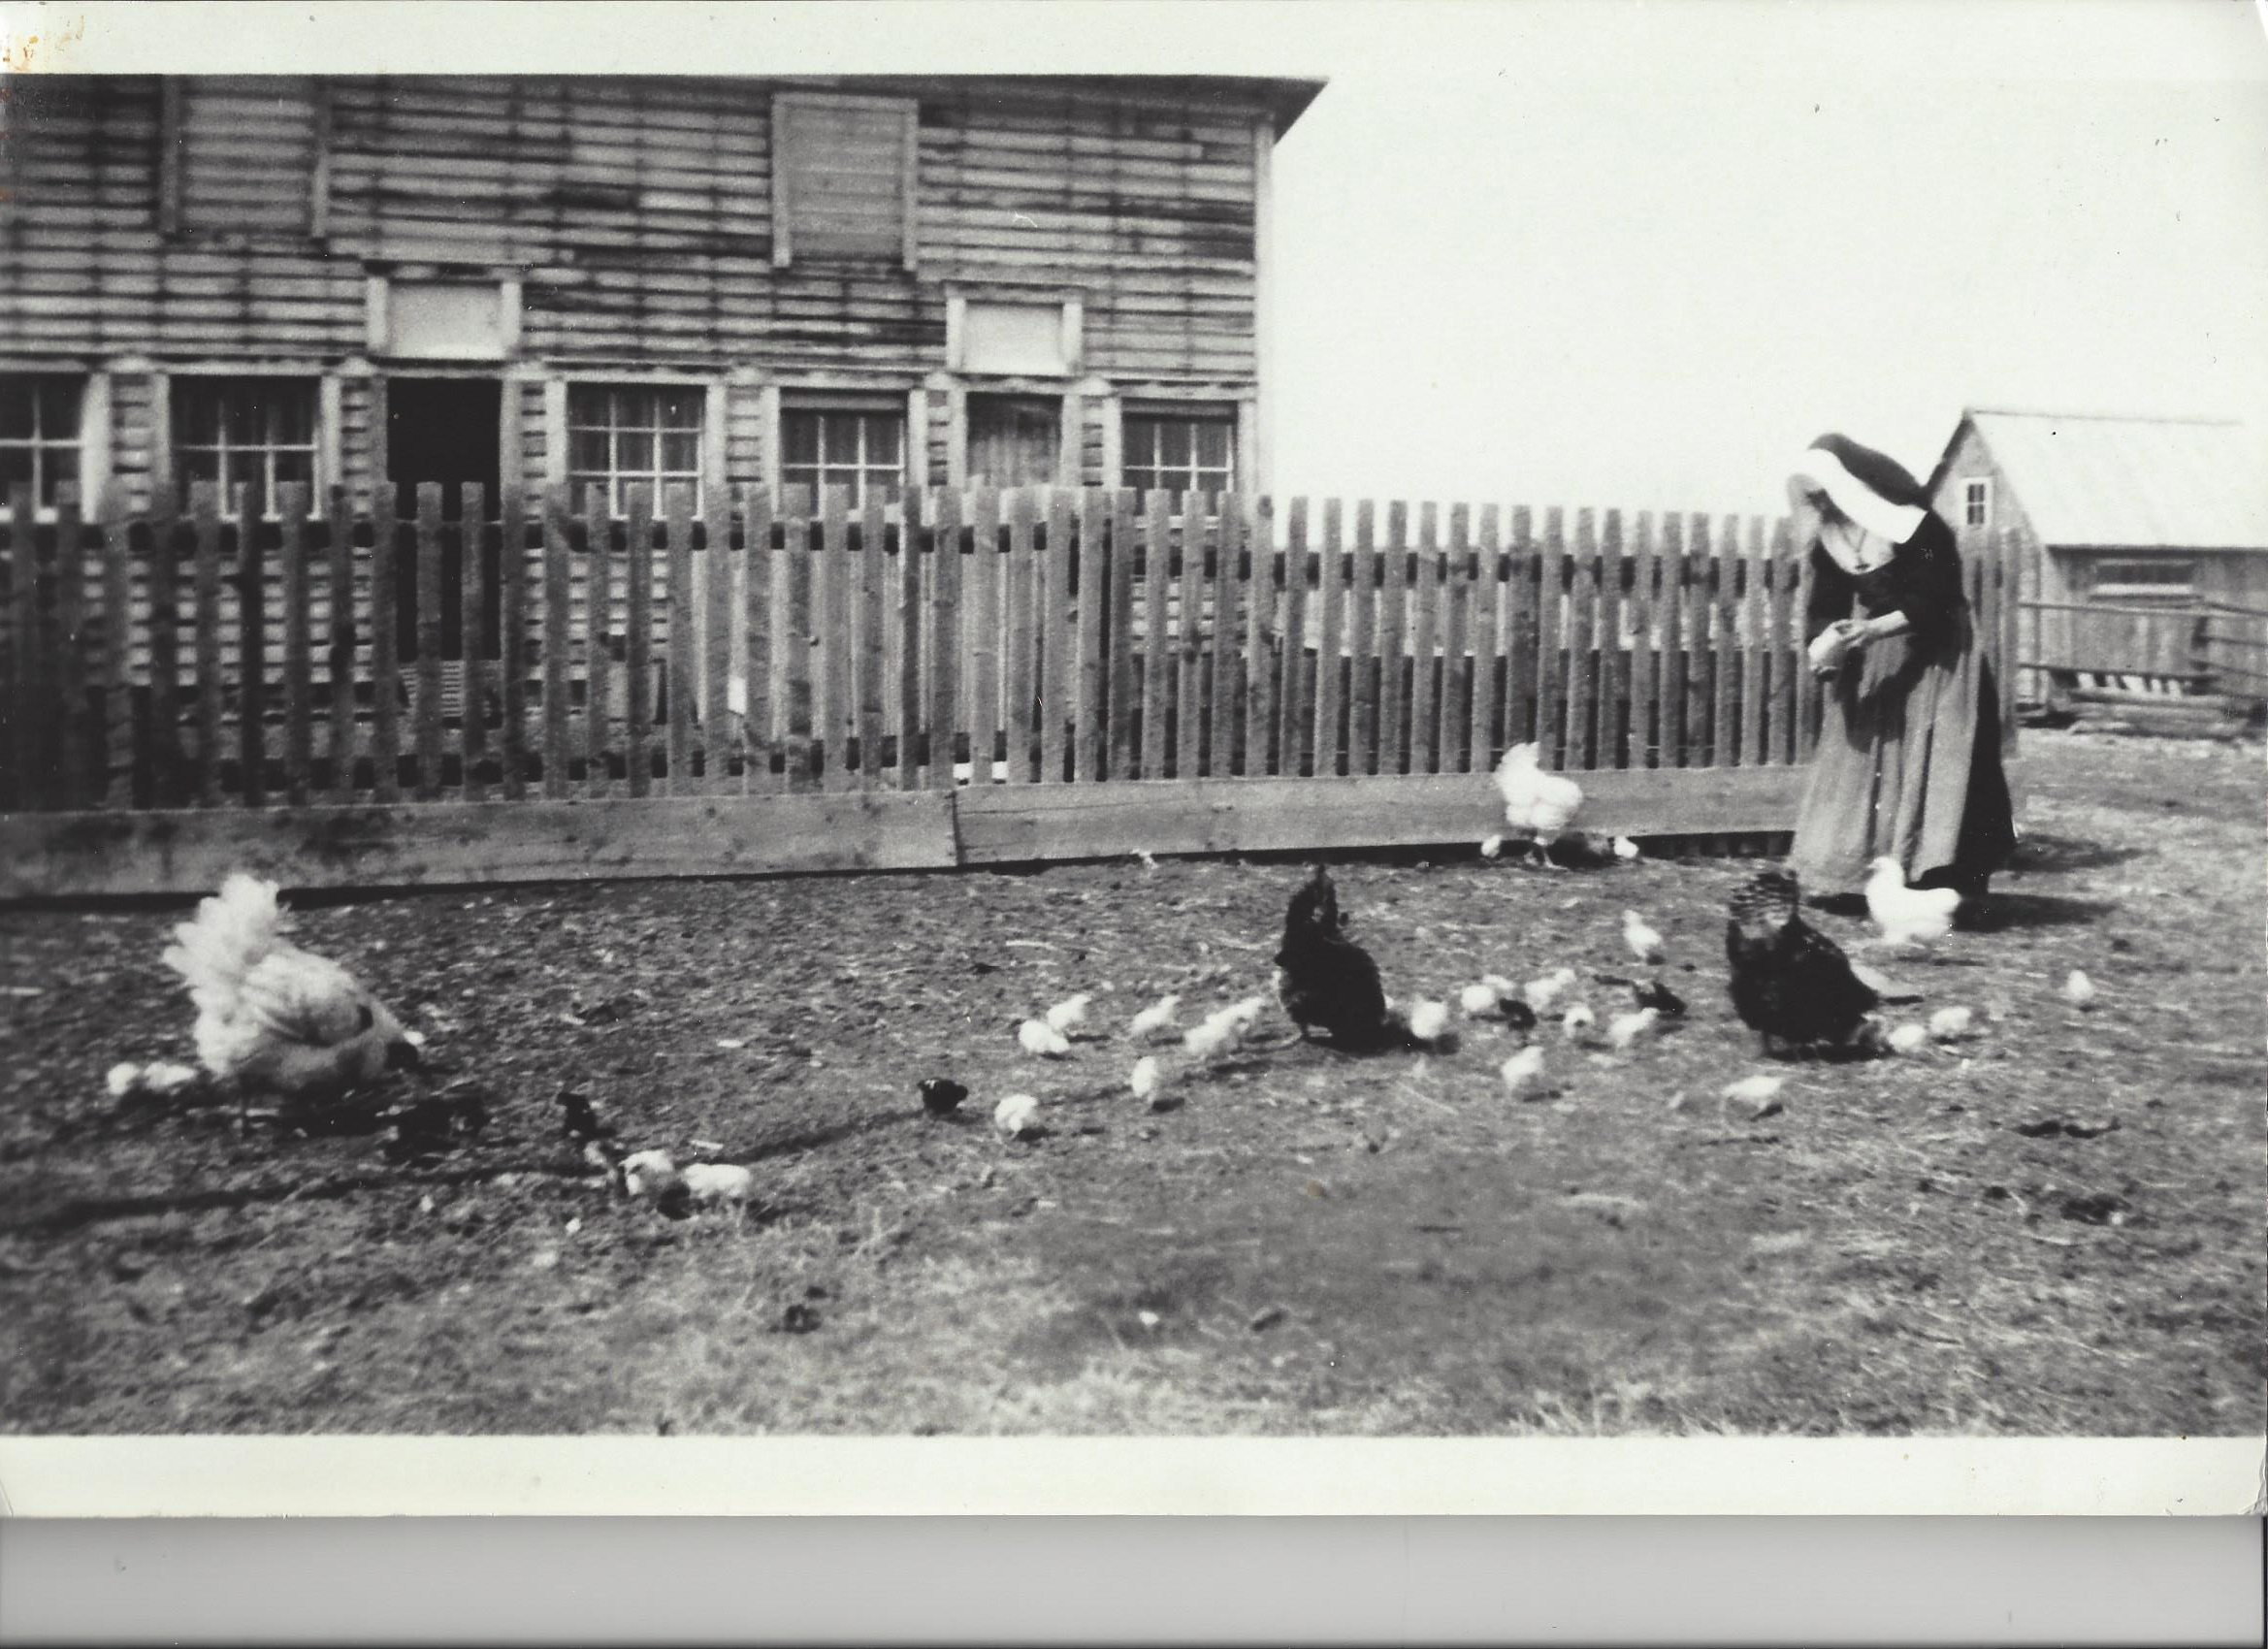 Nun Feeding Chickens at the Lac La Biche Mission, date and photographer unknown